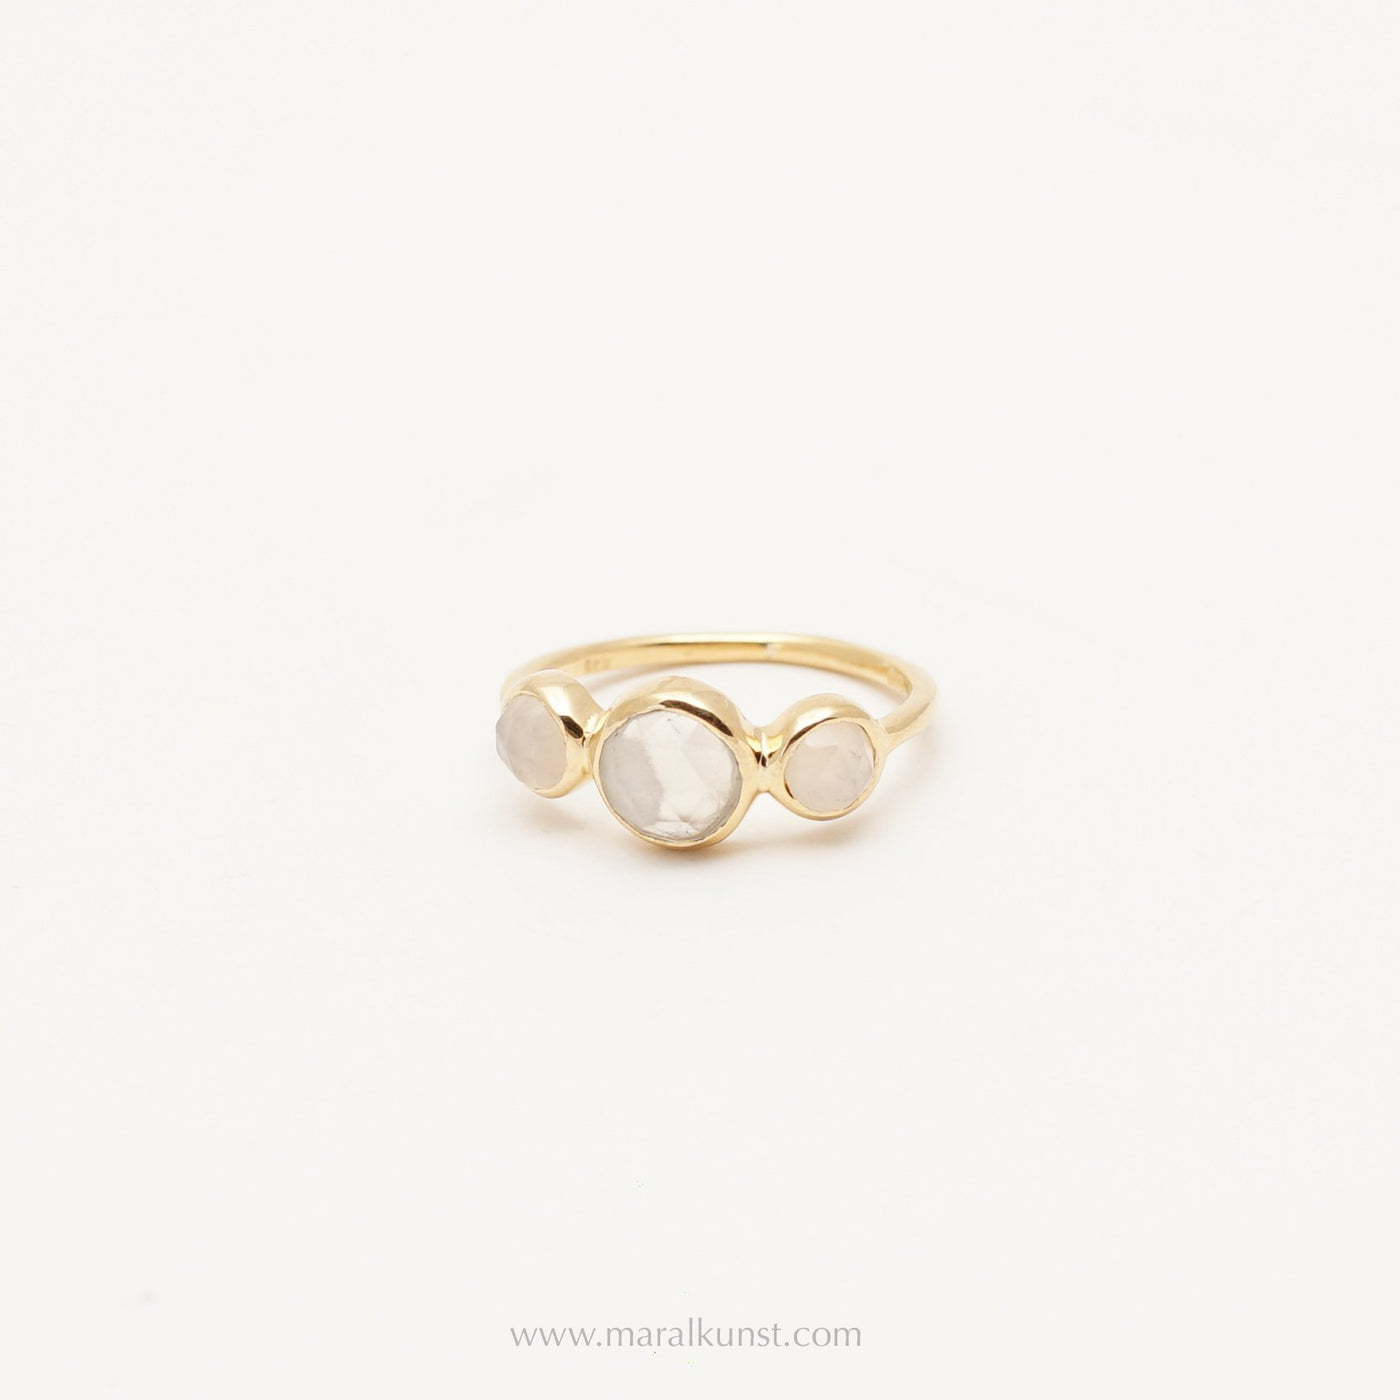 Gray moonstone Gold Ring - Maral Kunst Jewelry